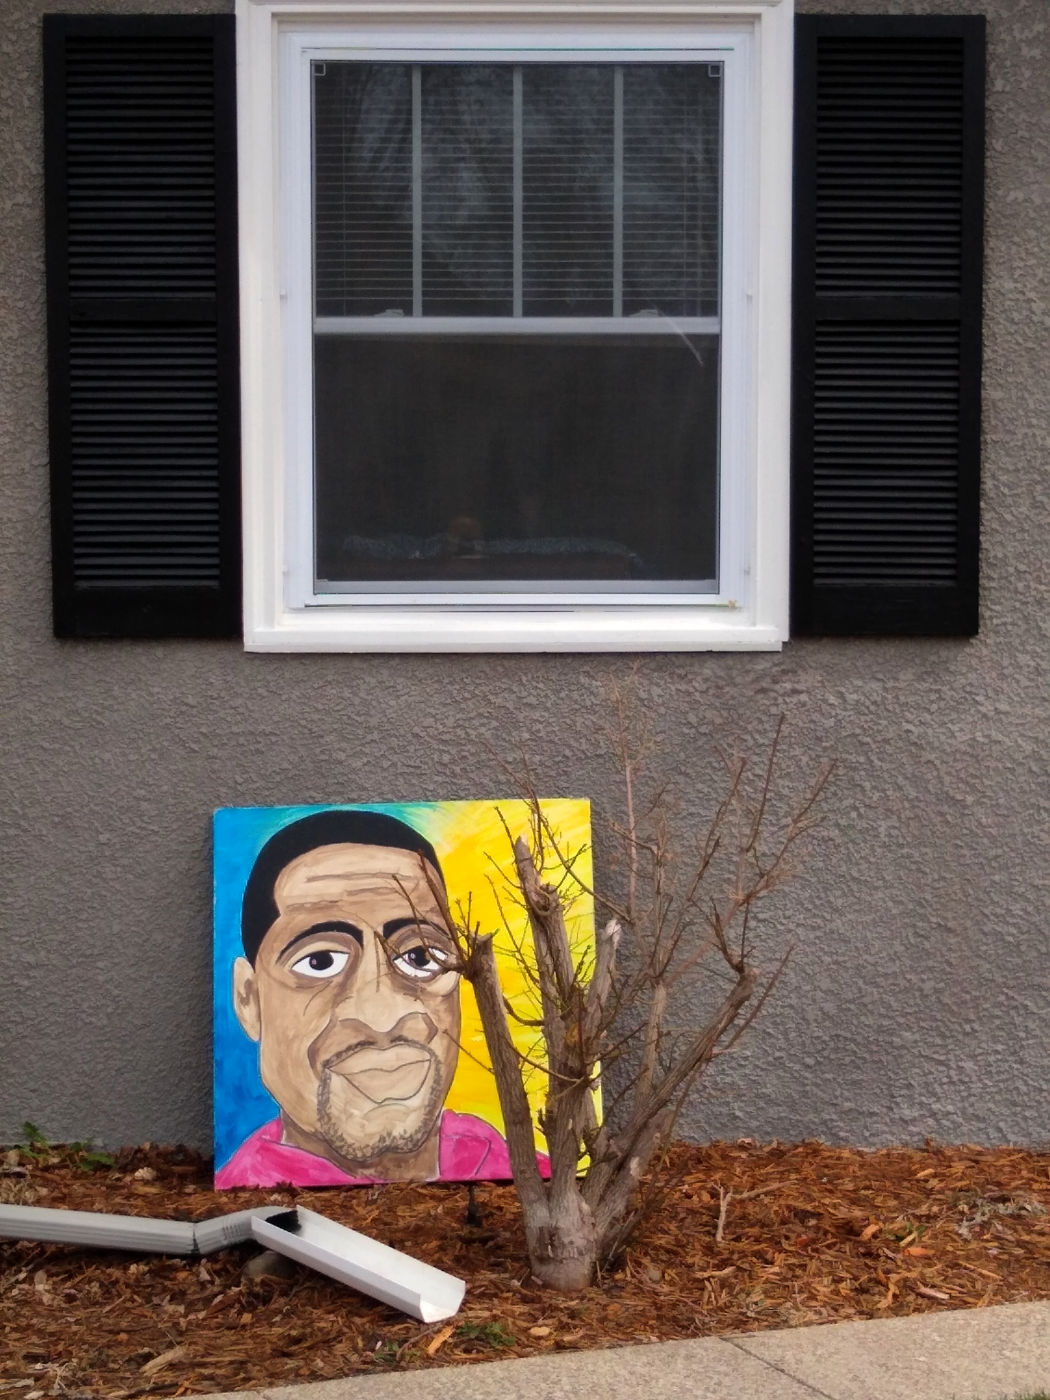 colorful painted portrait of a black man on canvas resting against a brown stucco wall with black and white window